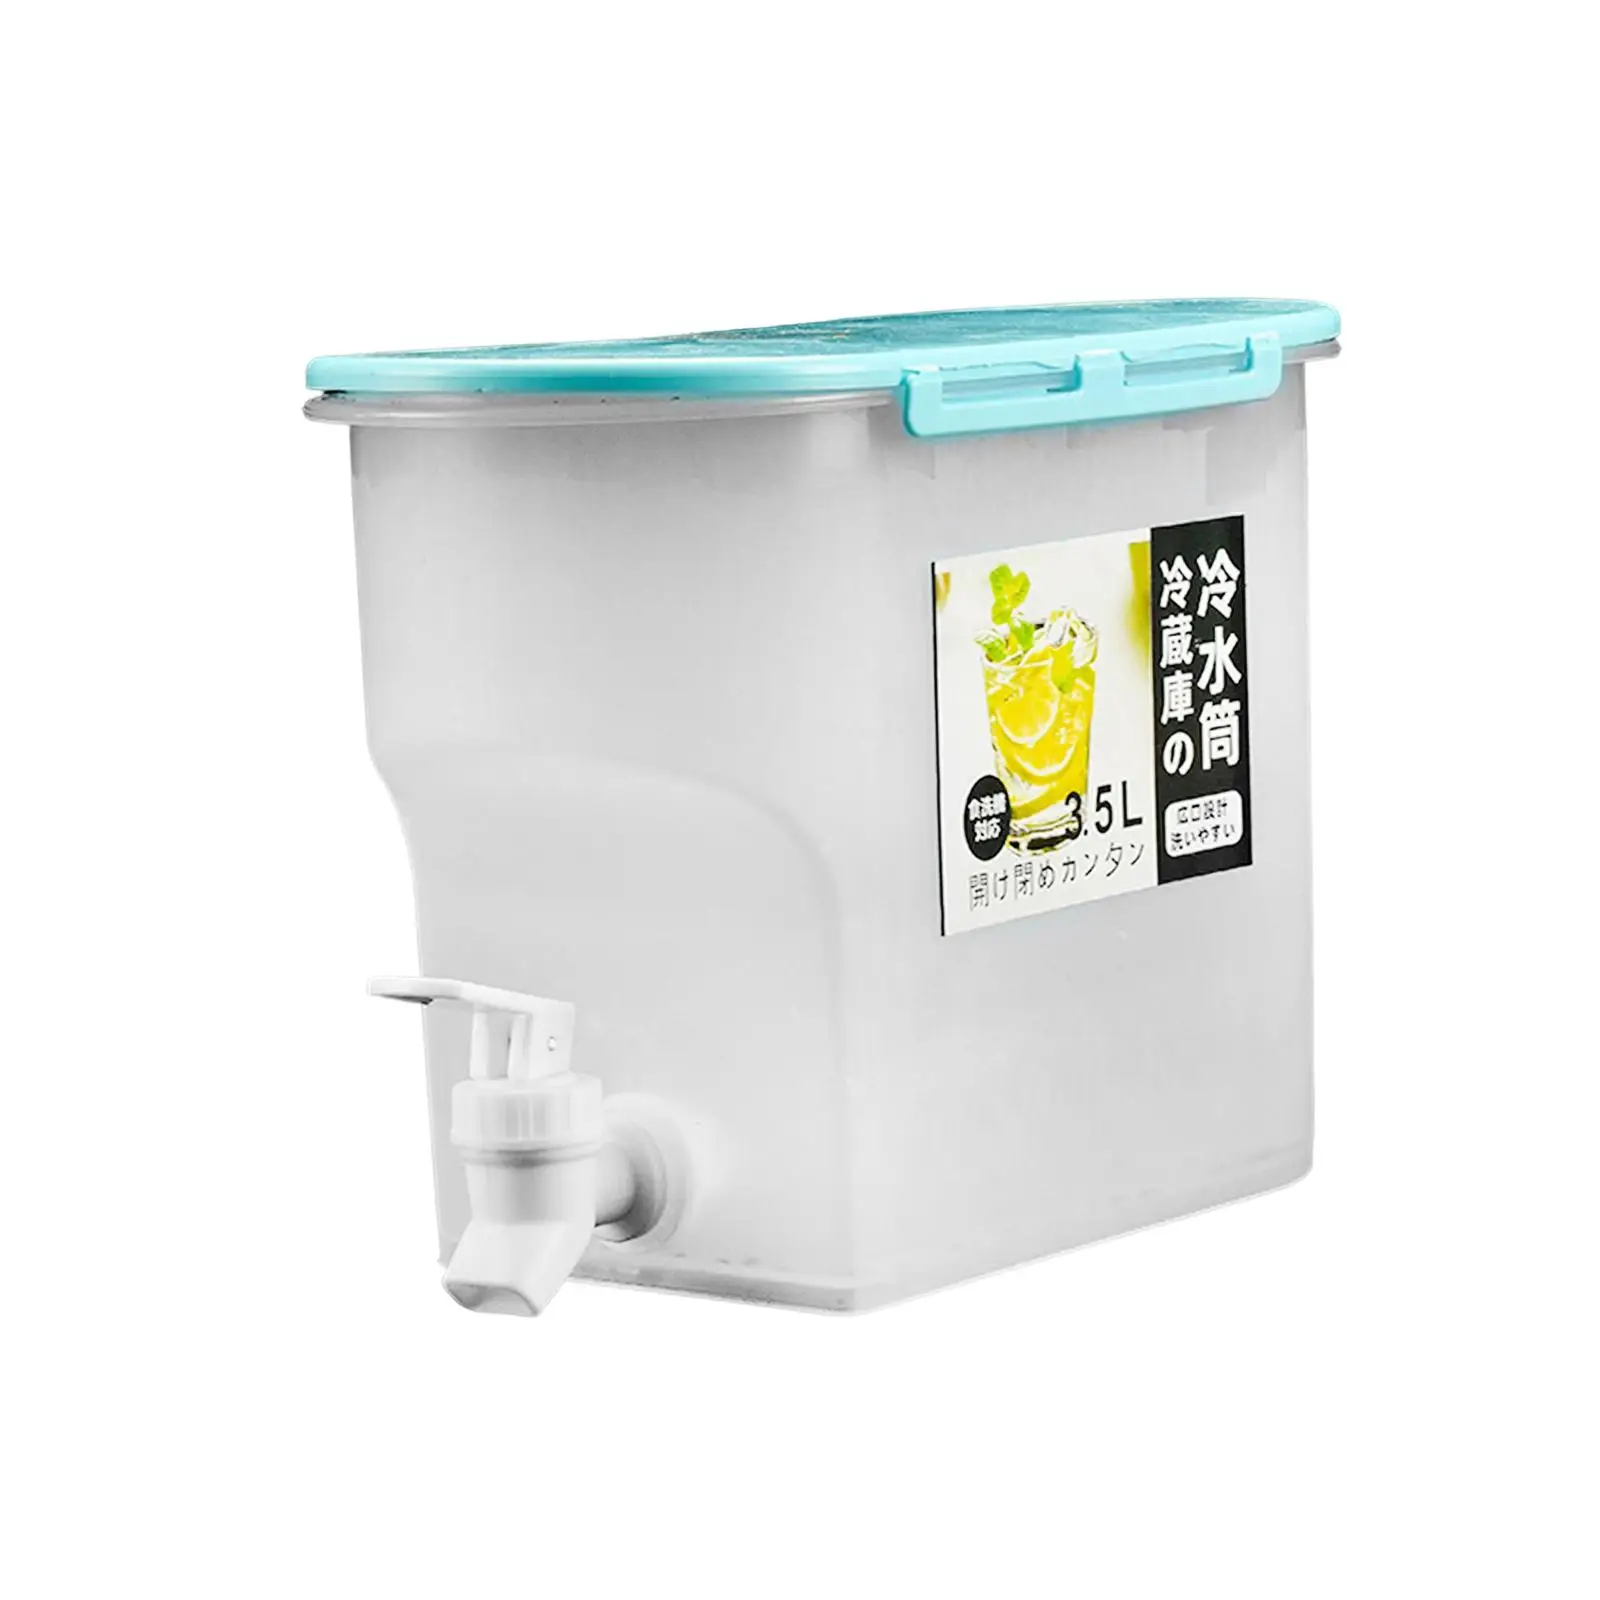 Dispenser with Faucet Thickened for Fridge Restaurant Party